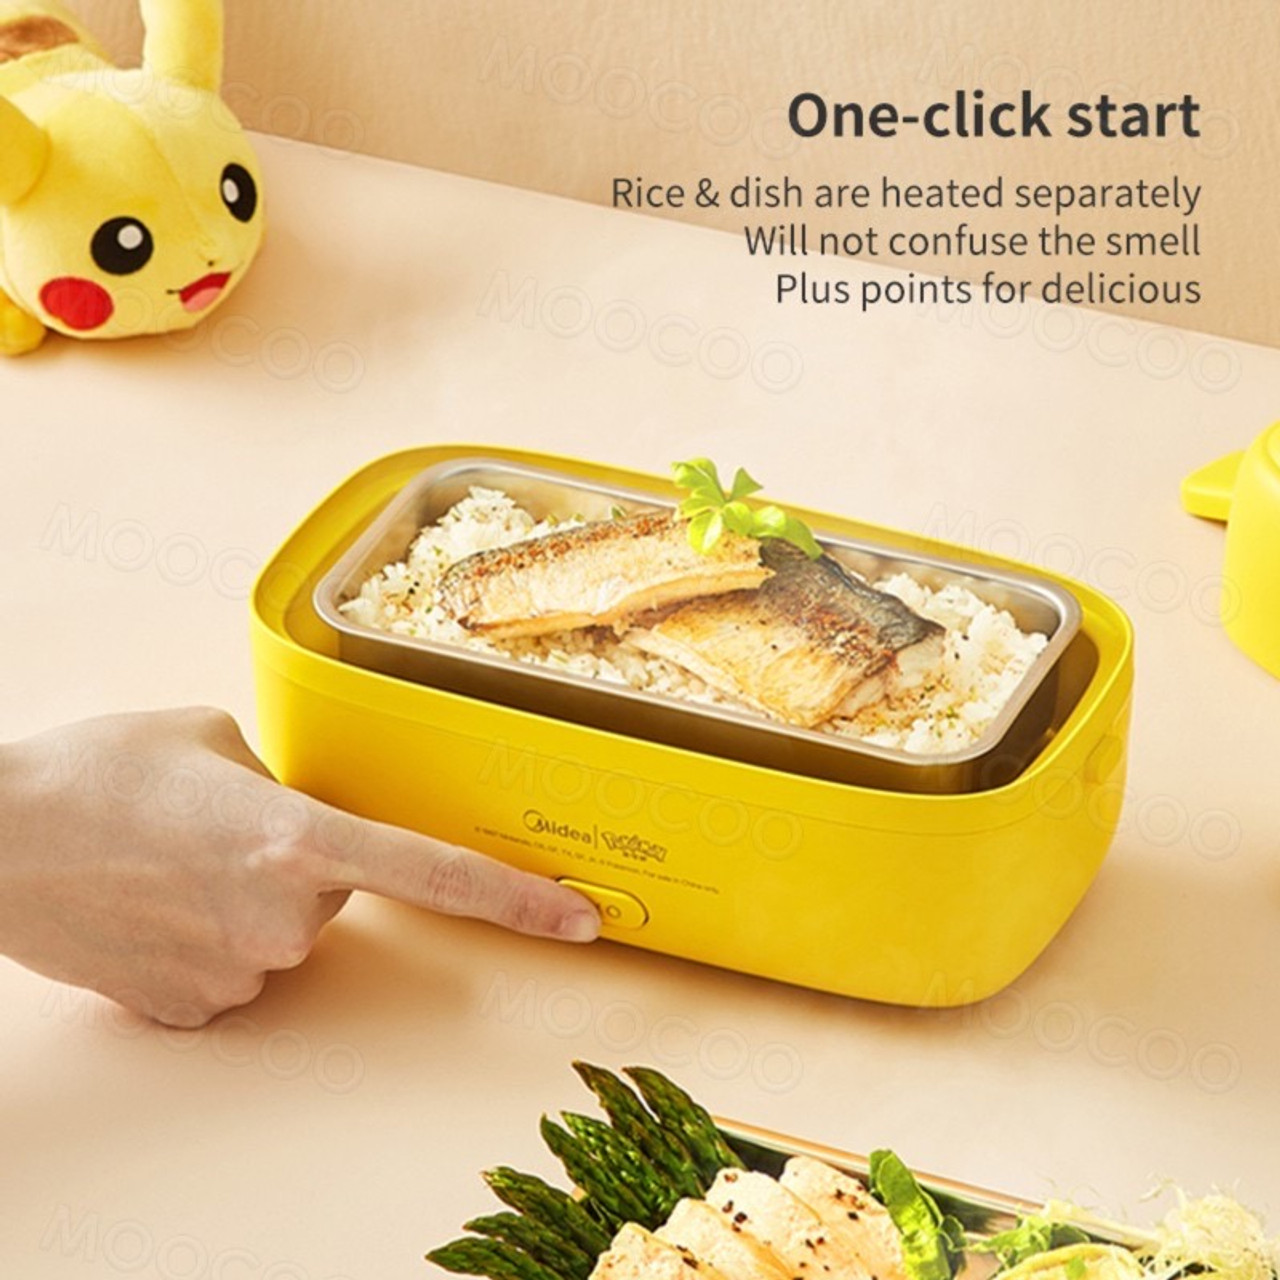 https://cdn11.bigcommerce.com/s-xvd8me65kx/images/stencil/1280x1280/products/223/1948/Midea_x_Pokemon_Electric_Heating_Lunch_Box_Portable_304_Stainless_Steel_Dual_Layer_Thermal_Lunch_Box_1__49208.1628347642.jpg?c=1